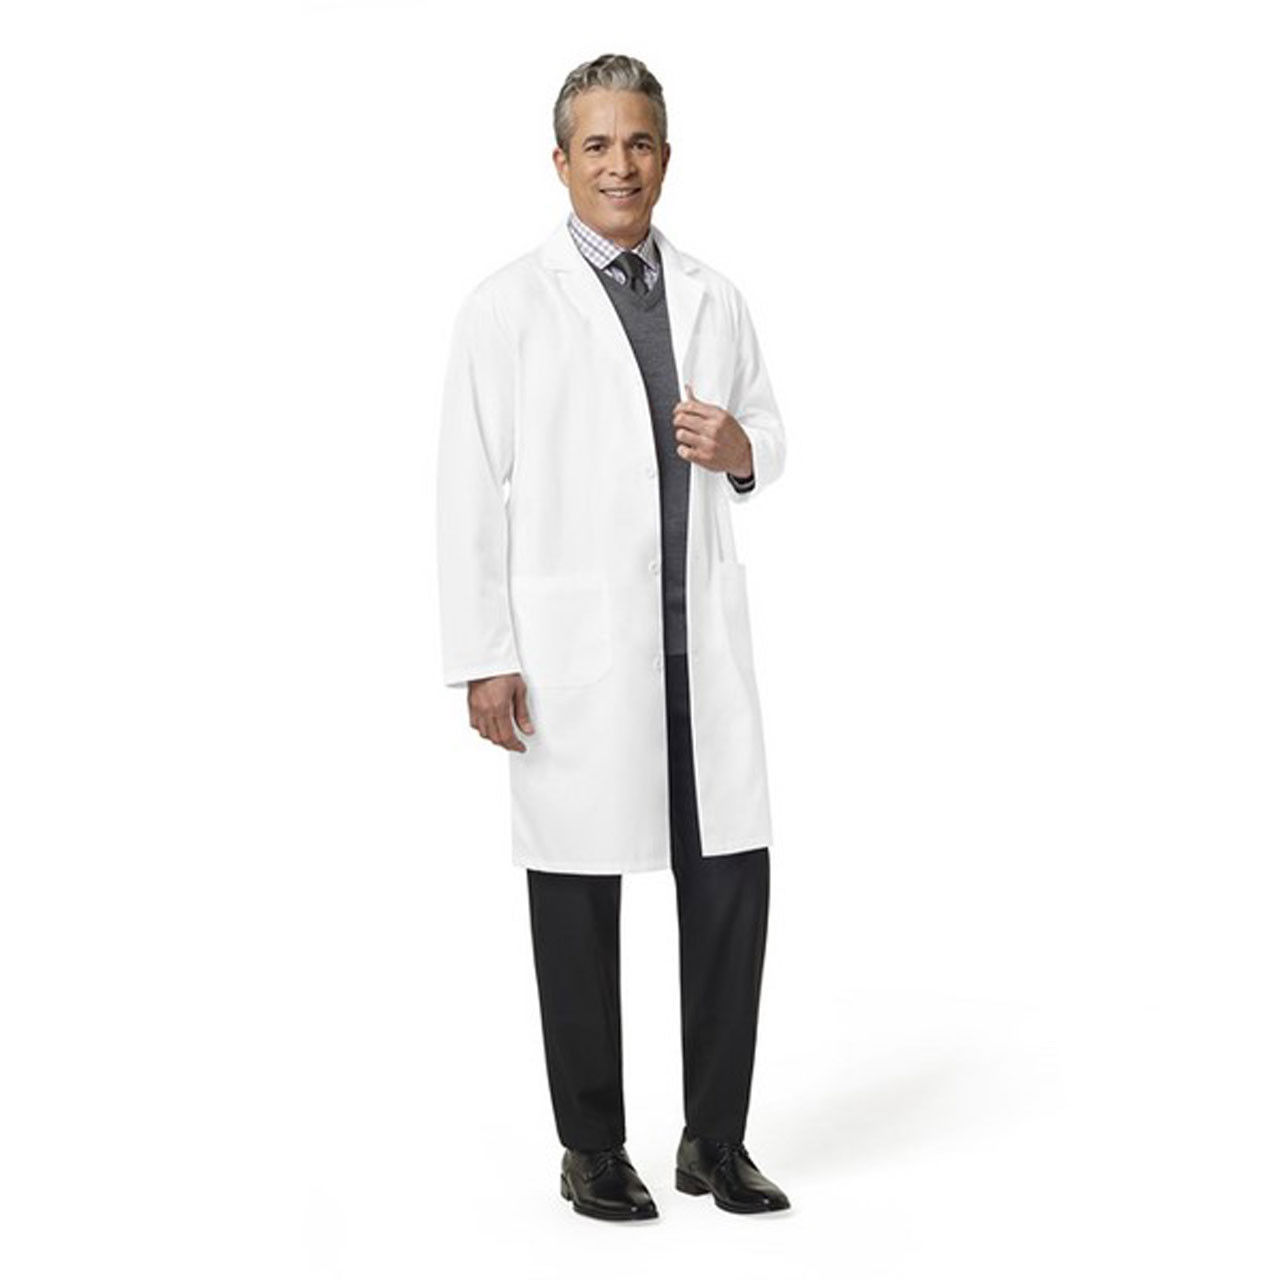 Are the bulk lab coats both comfortable and durable?